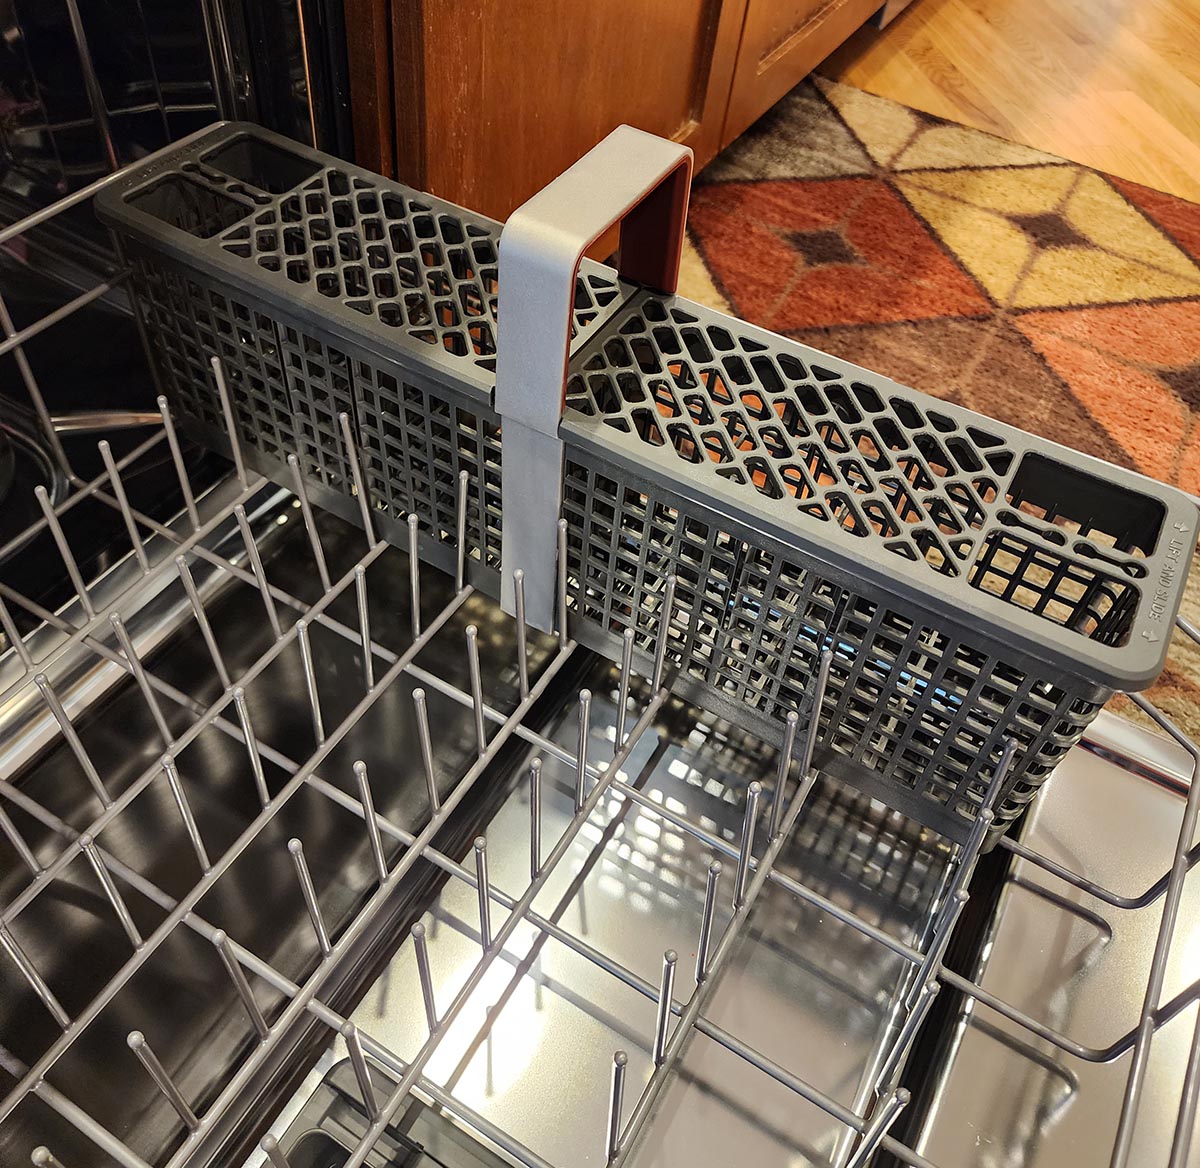 The bottom rack of the KitchenAid FreeFlex dishwasher extended with the utensil basket on one side